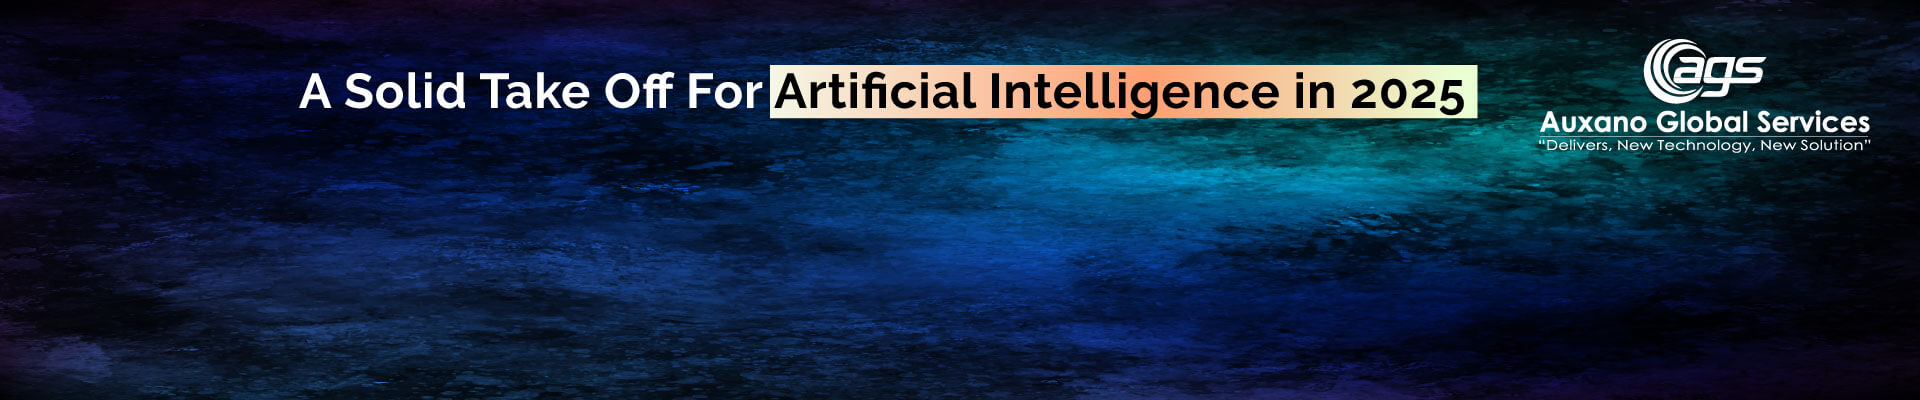 A-Solid-Take-Off-For-Artificial-Intelligence-In-2025-Banner